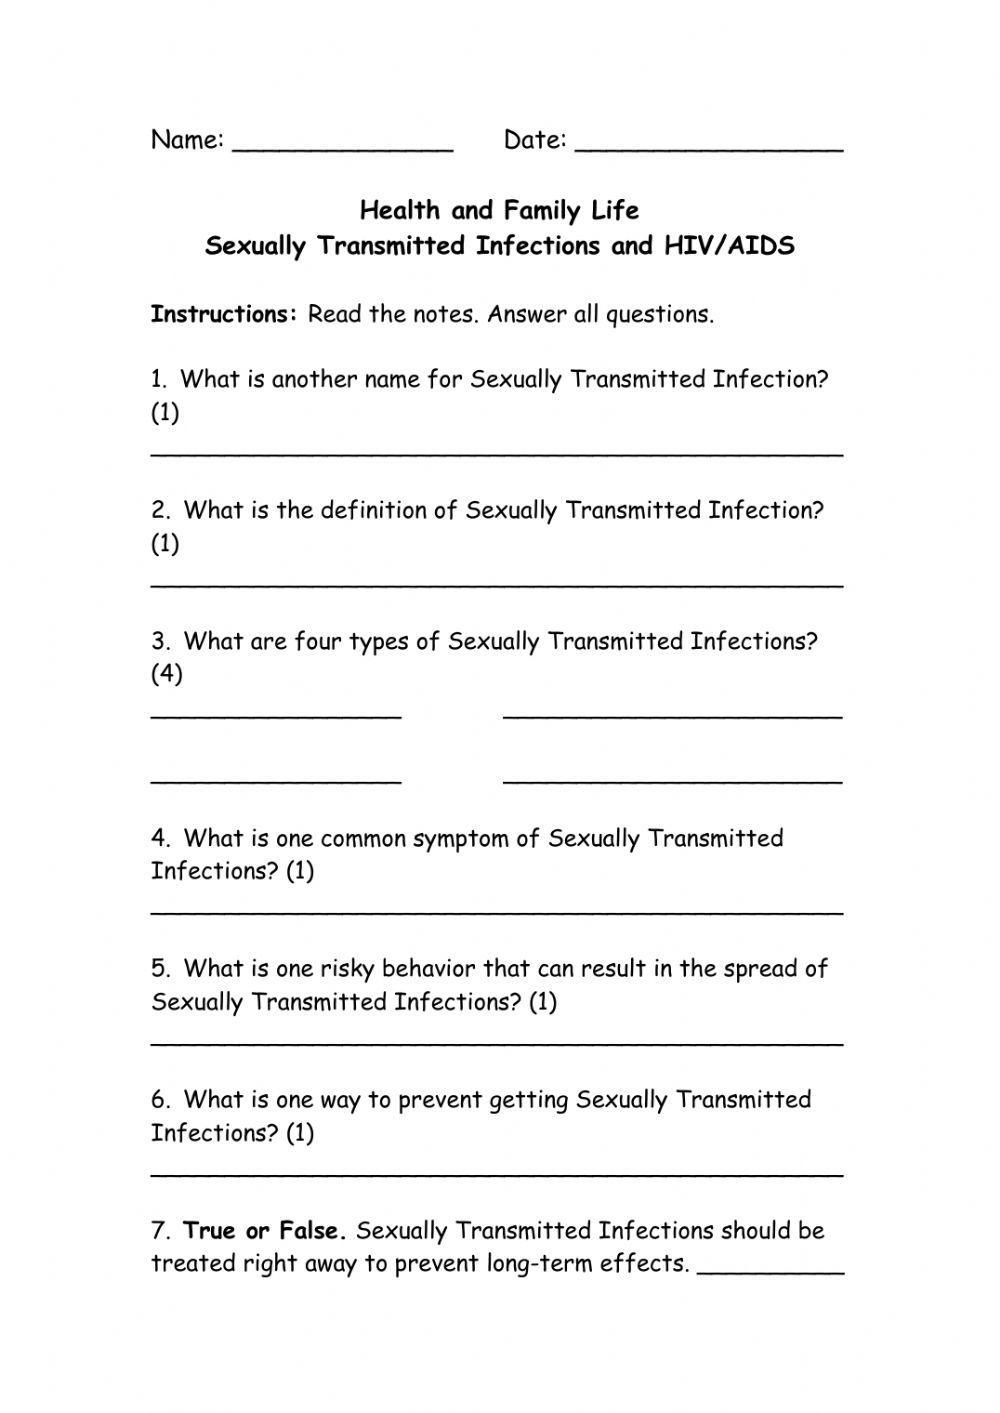 Sexually Transmitted Infections, HIV and AIDS